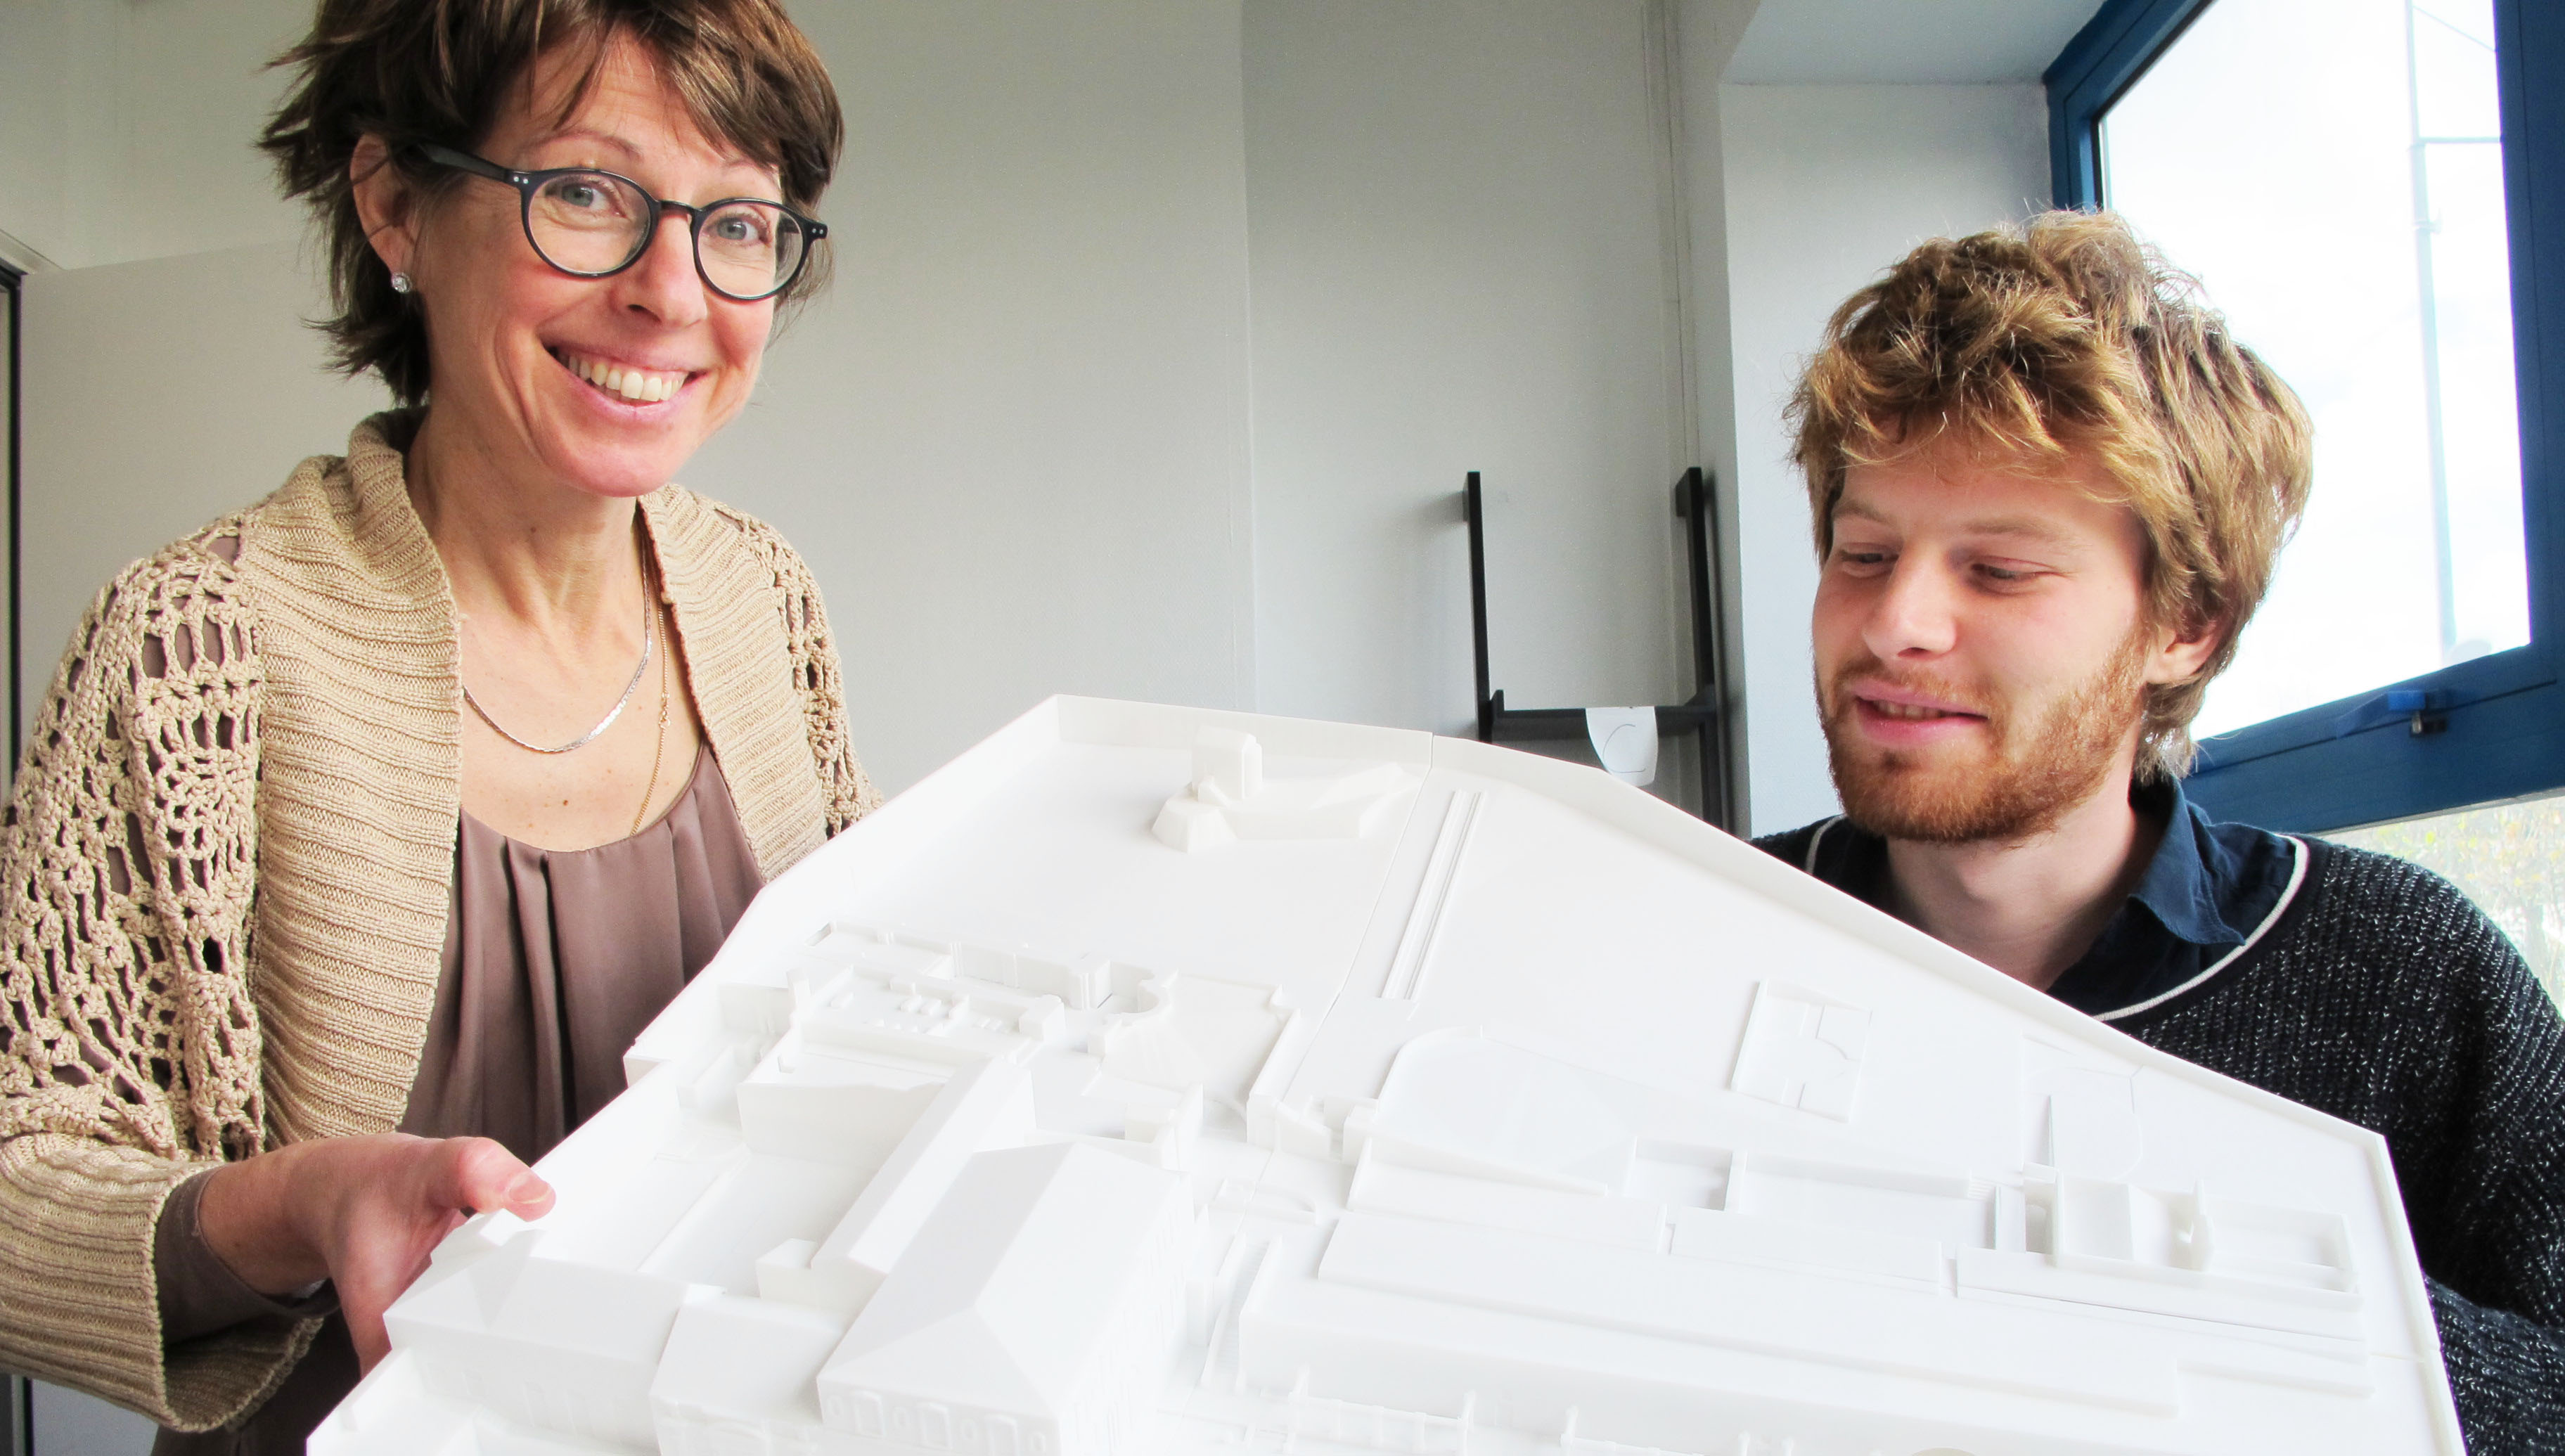 3D Printed Cultural Heritage: an abbaye model for the visually impaired